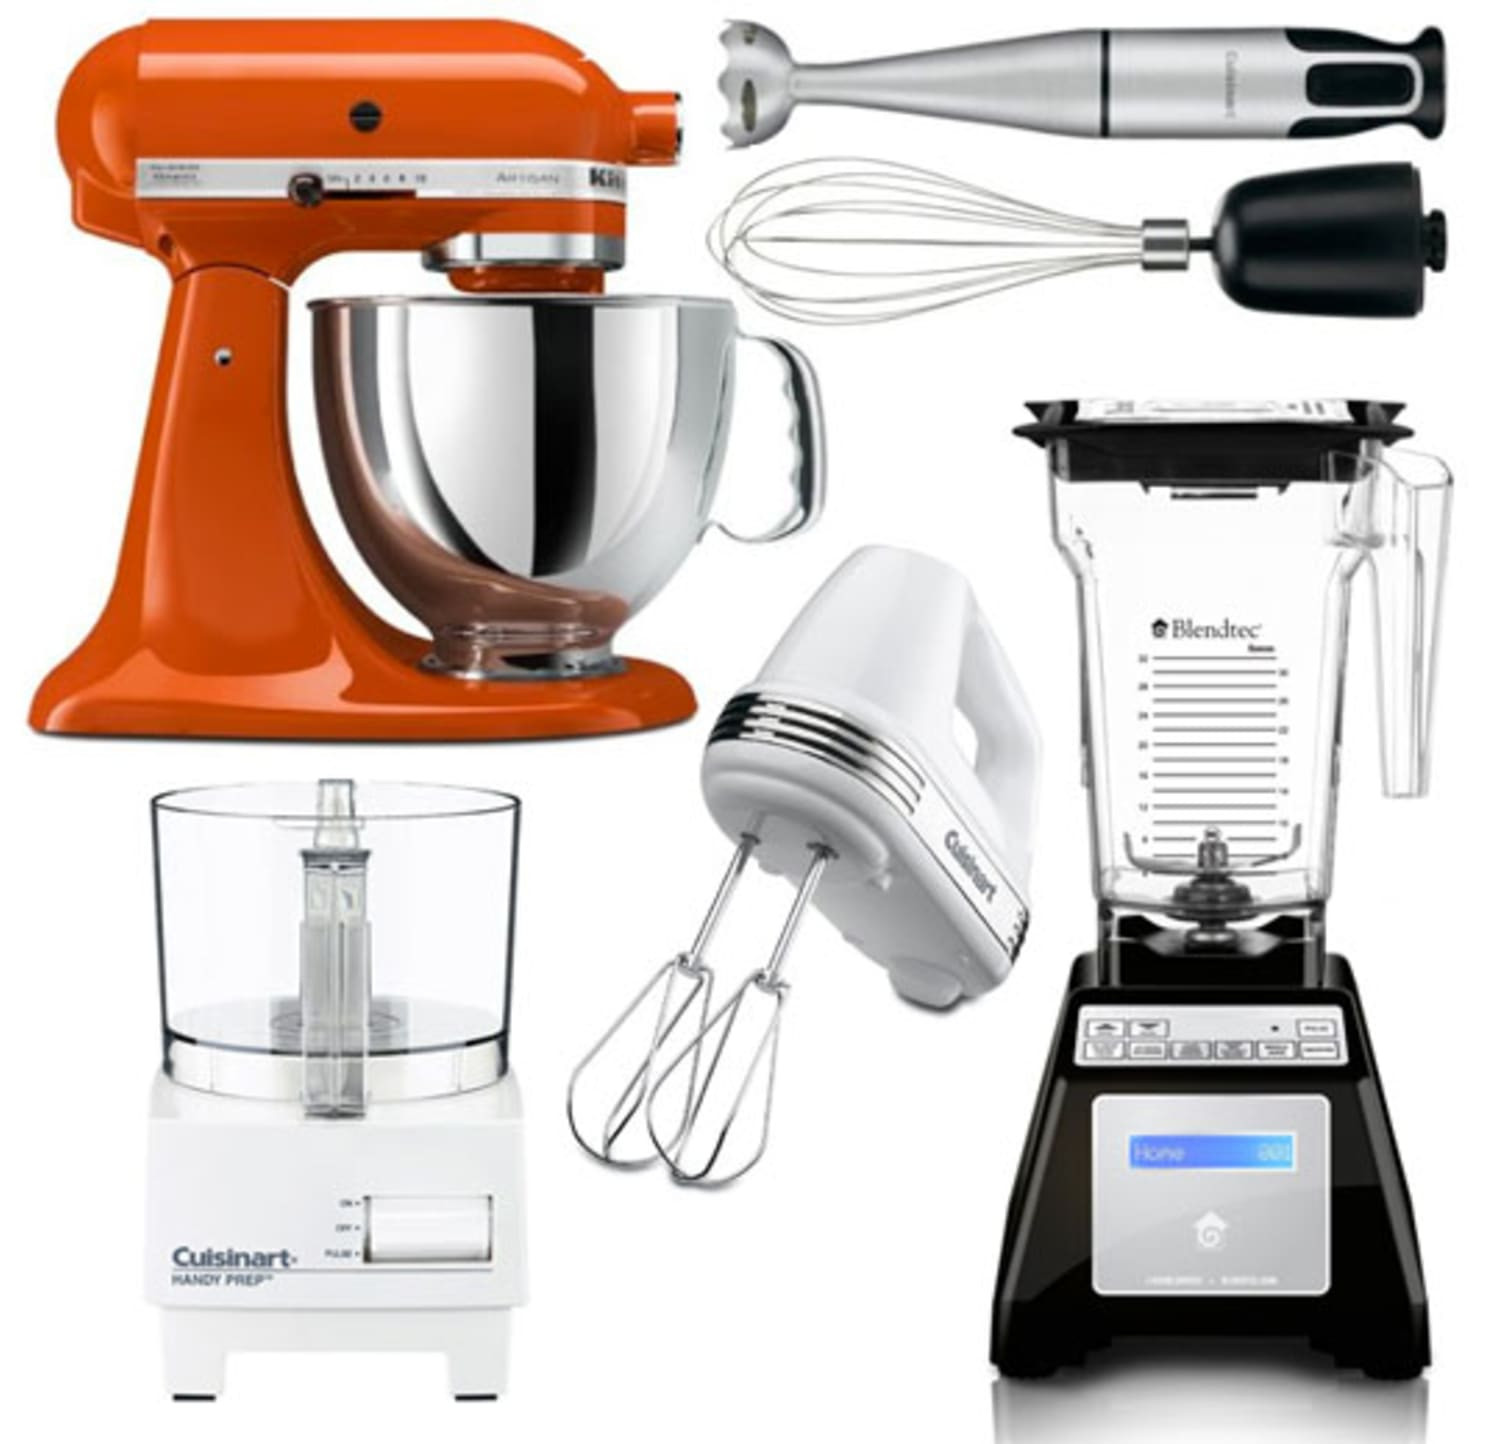 Small Electric Kitchen Appliance
 The Kitchn’s Guide to Essential Small Electric Appliances